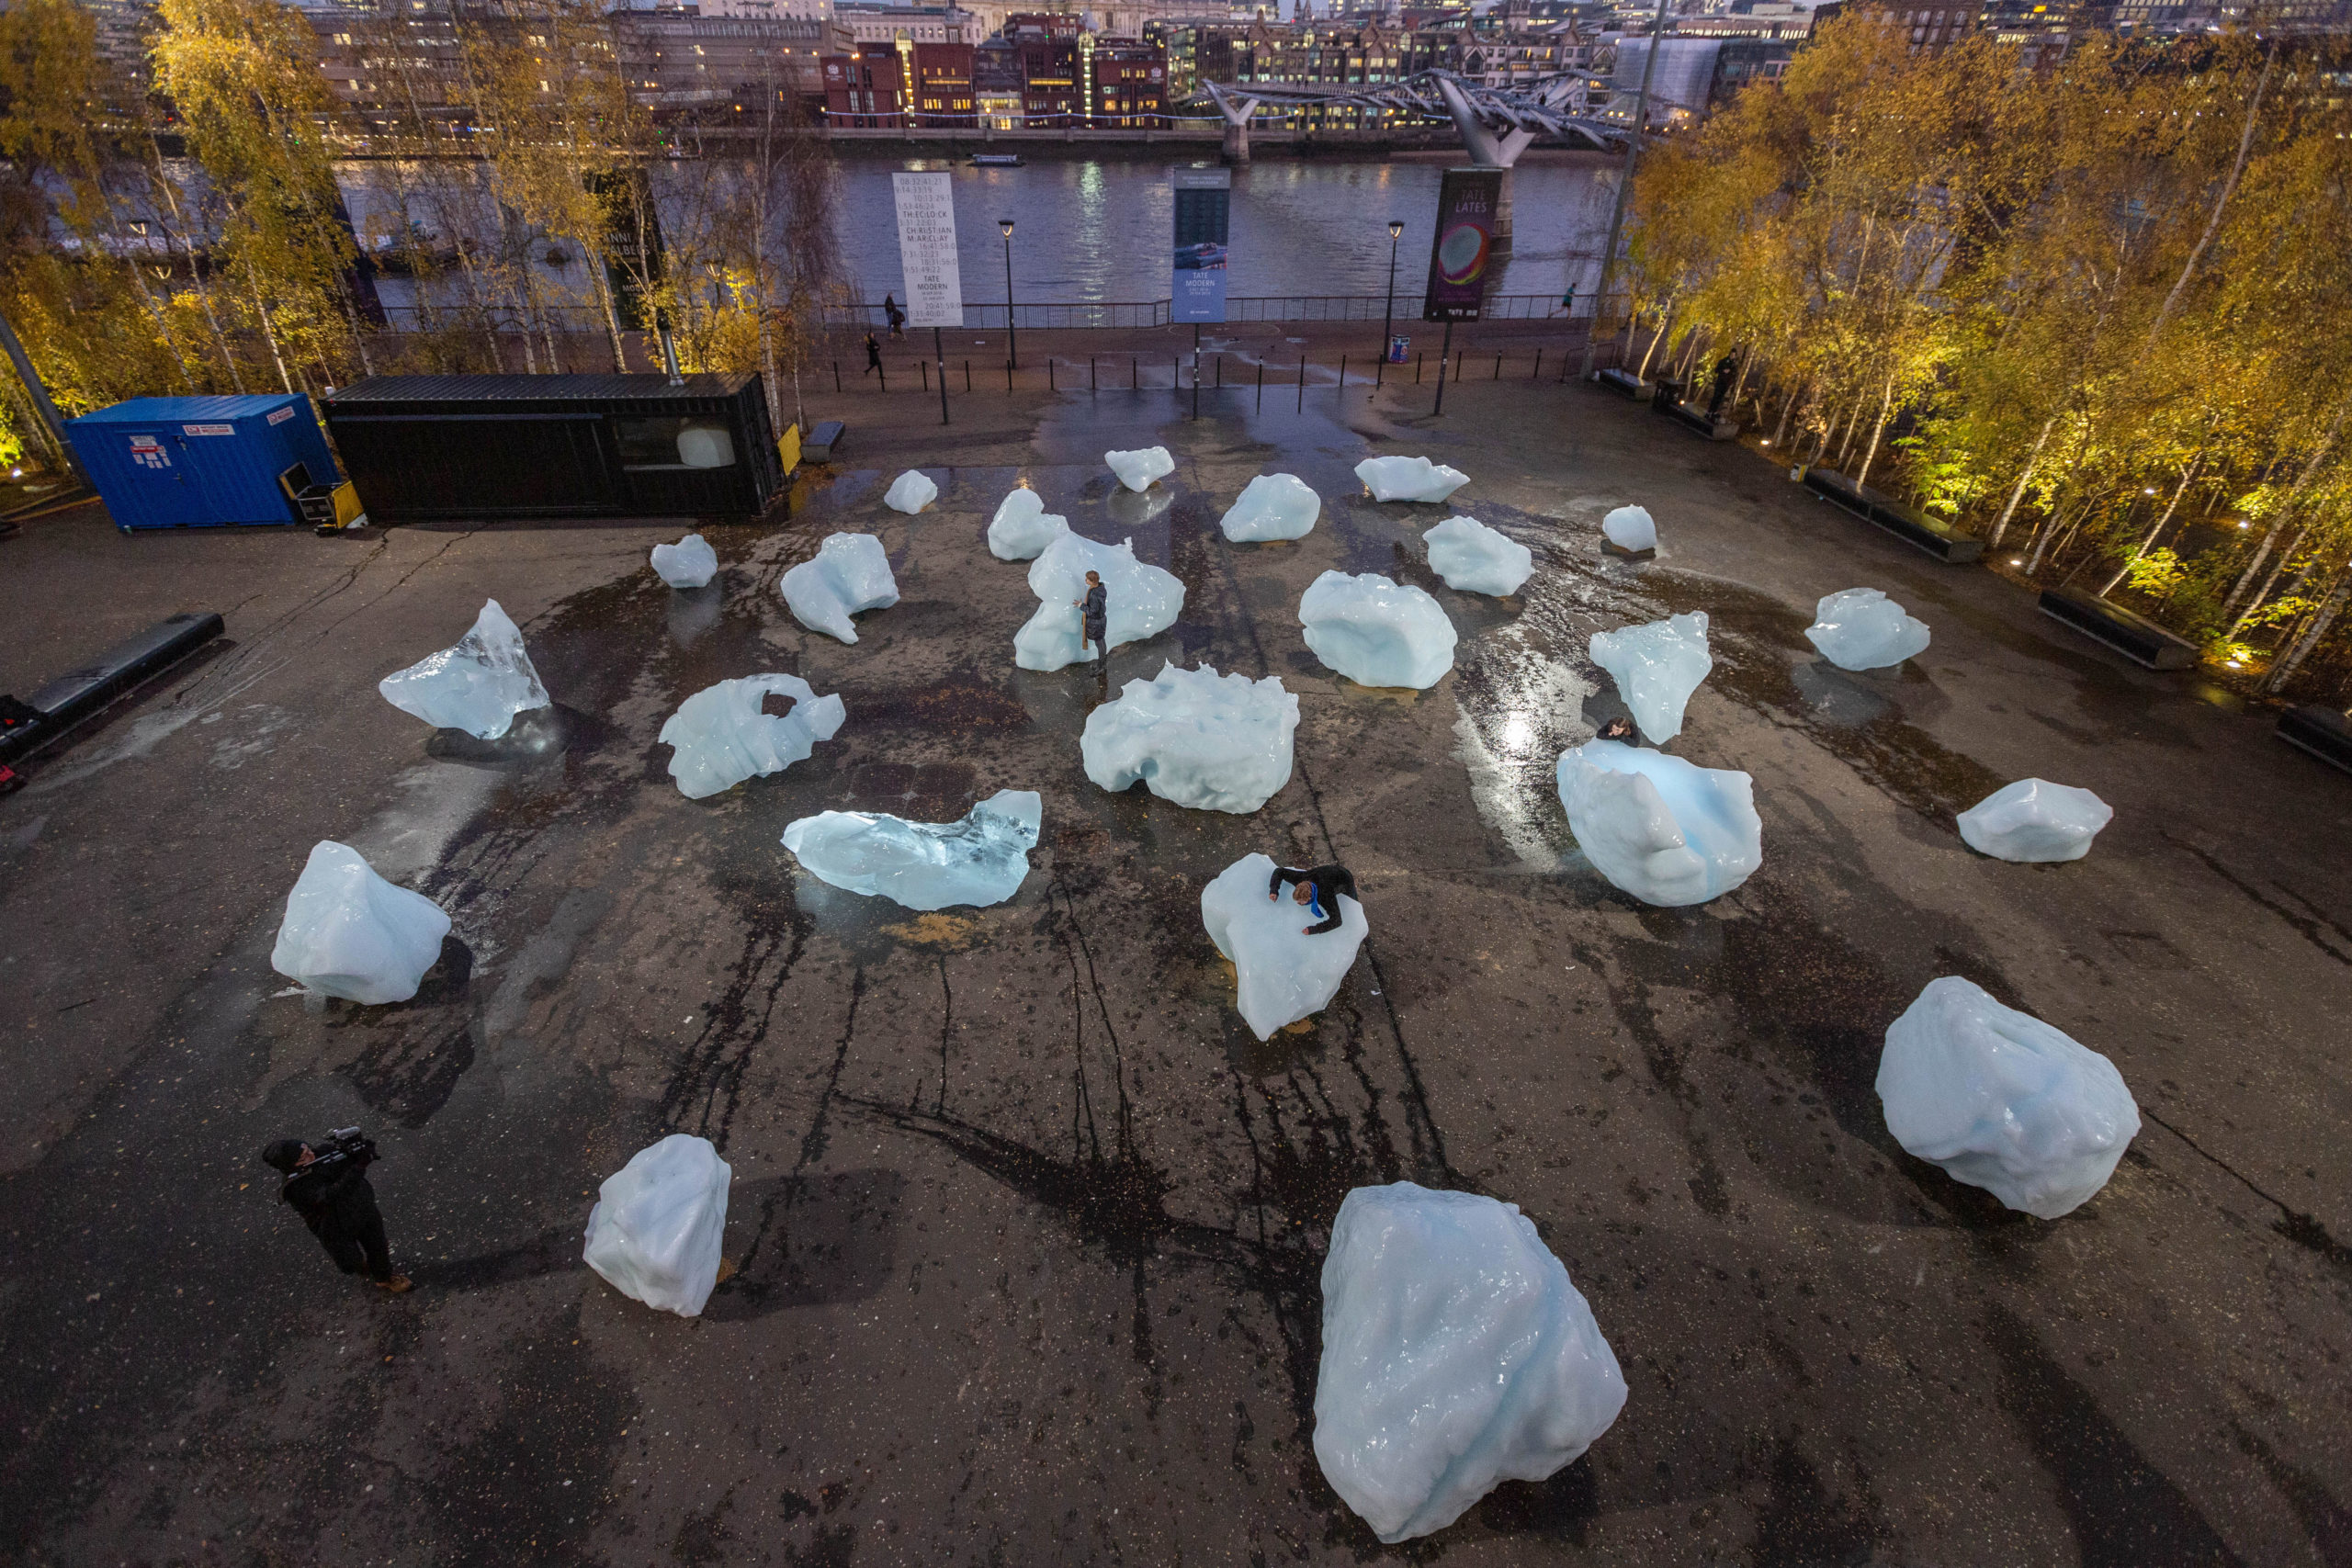 Olafur Eliasson's Ice Watch was slowly disappearing